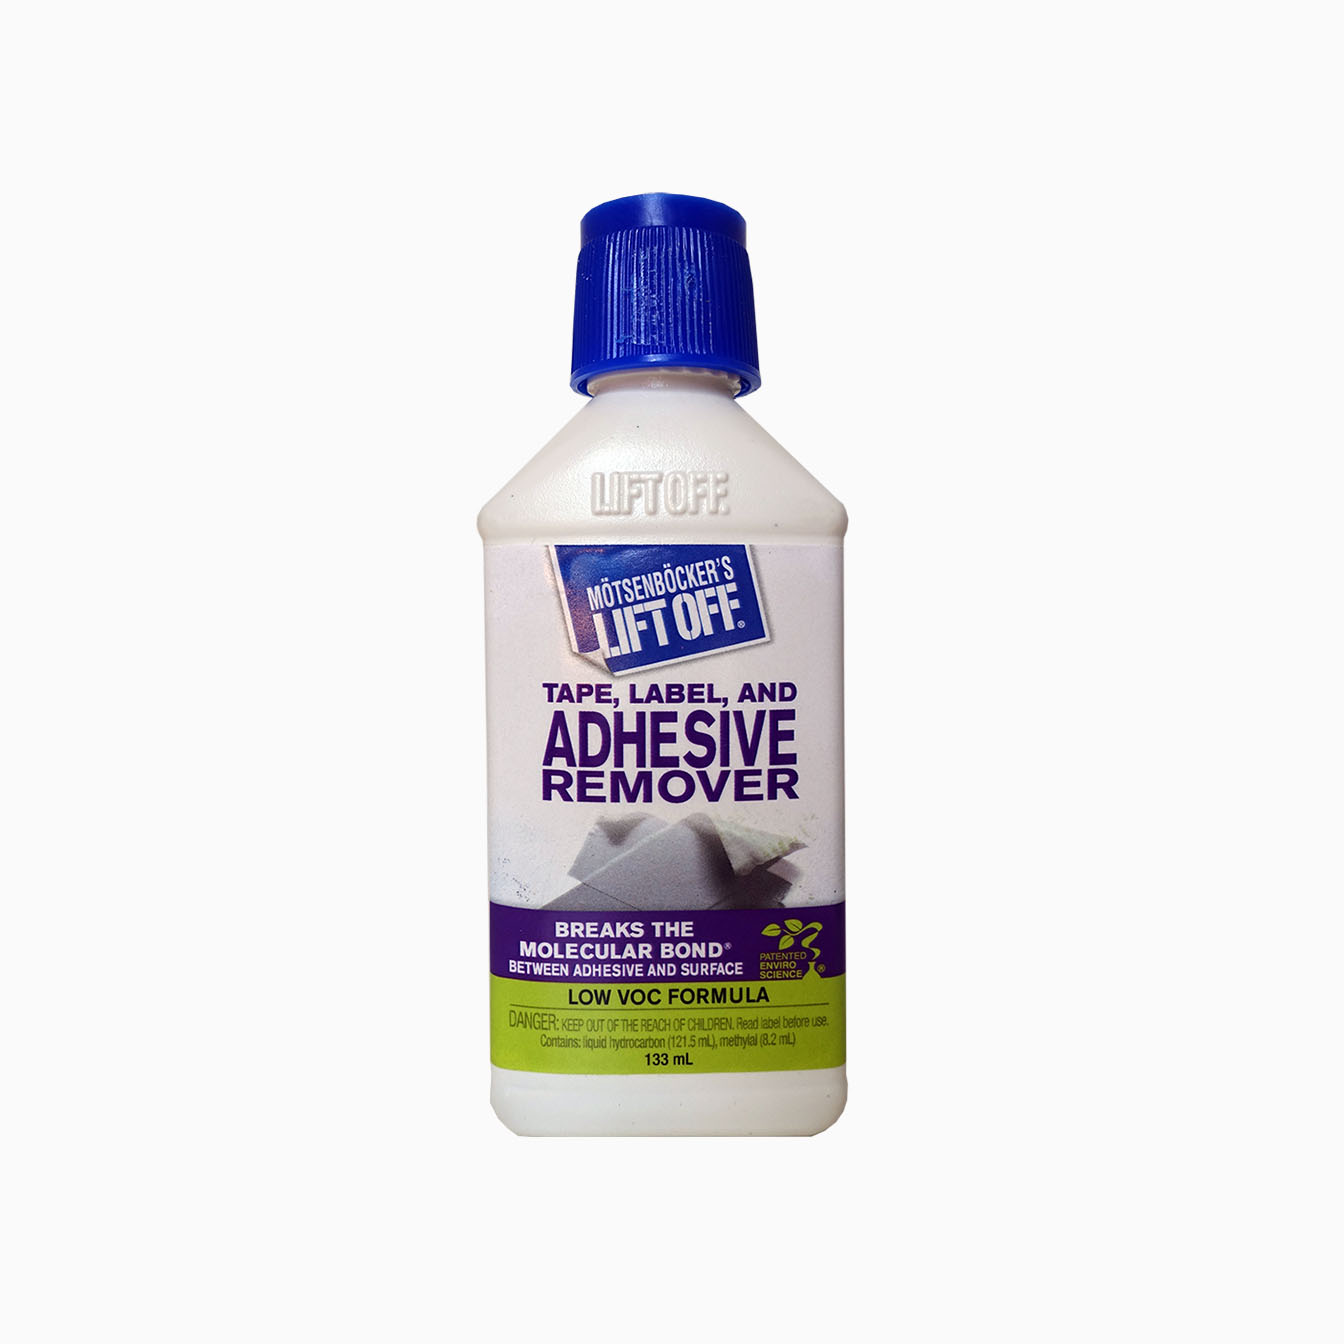 Mötsenböcker’s Lift Off® Tape, Label, and Adhesive Remover - Pack